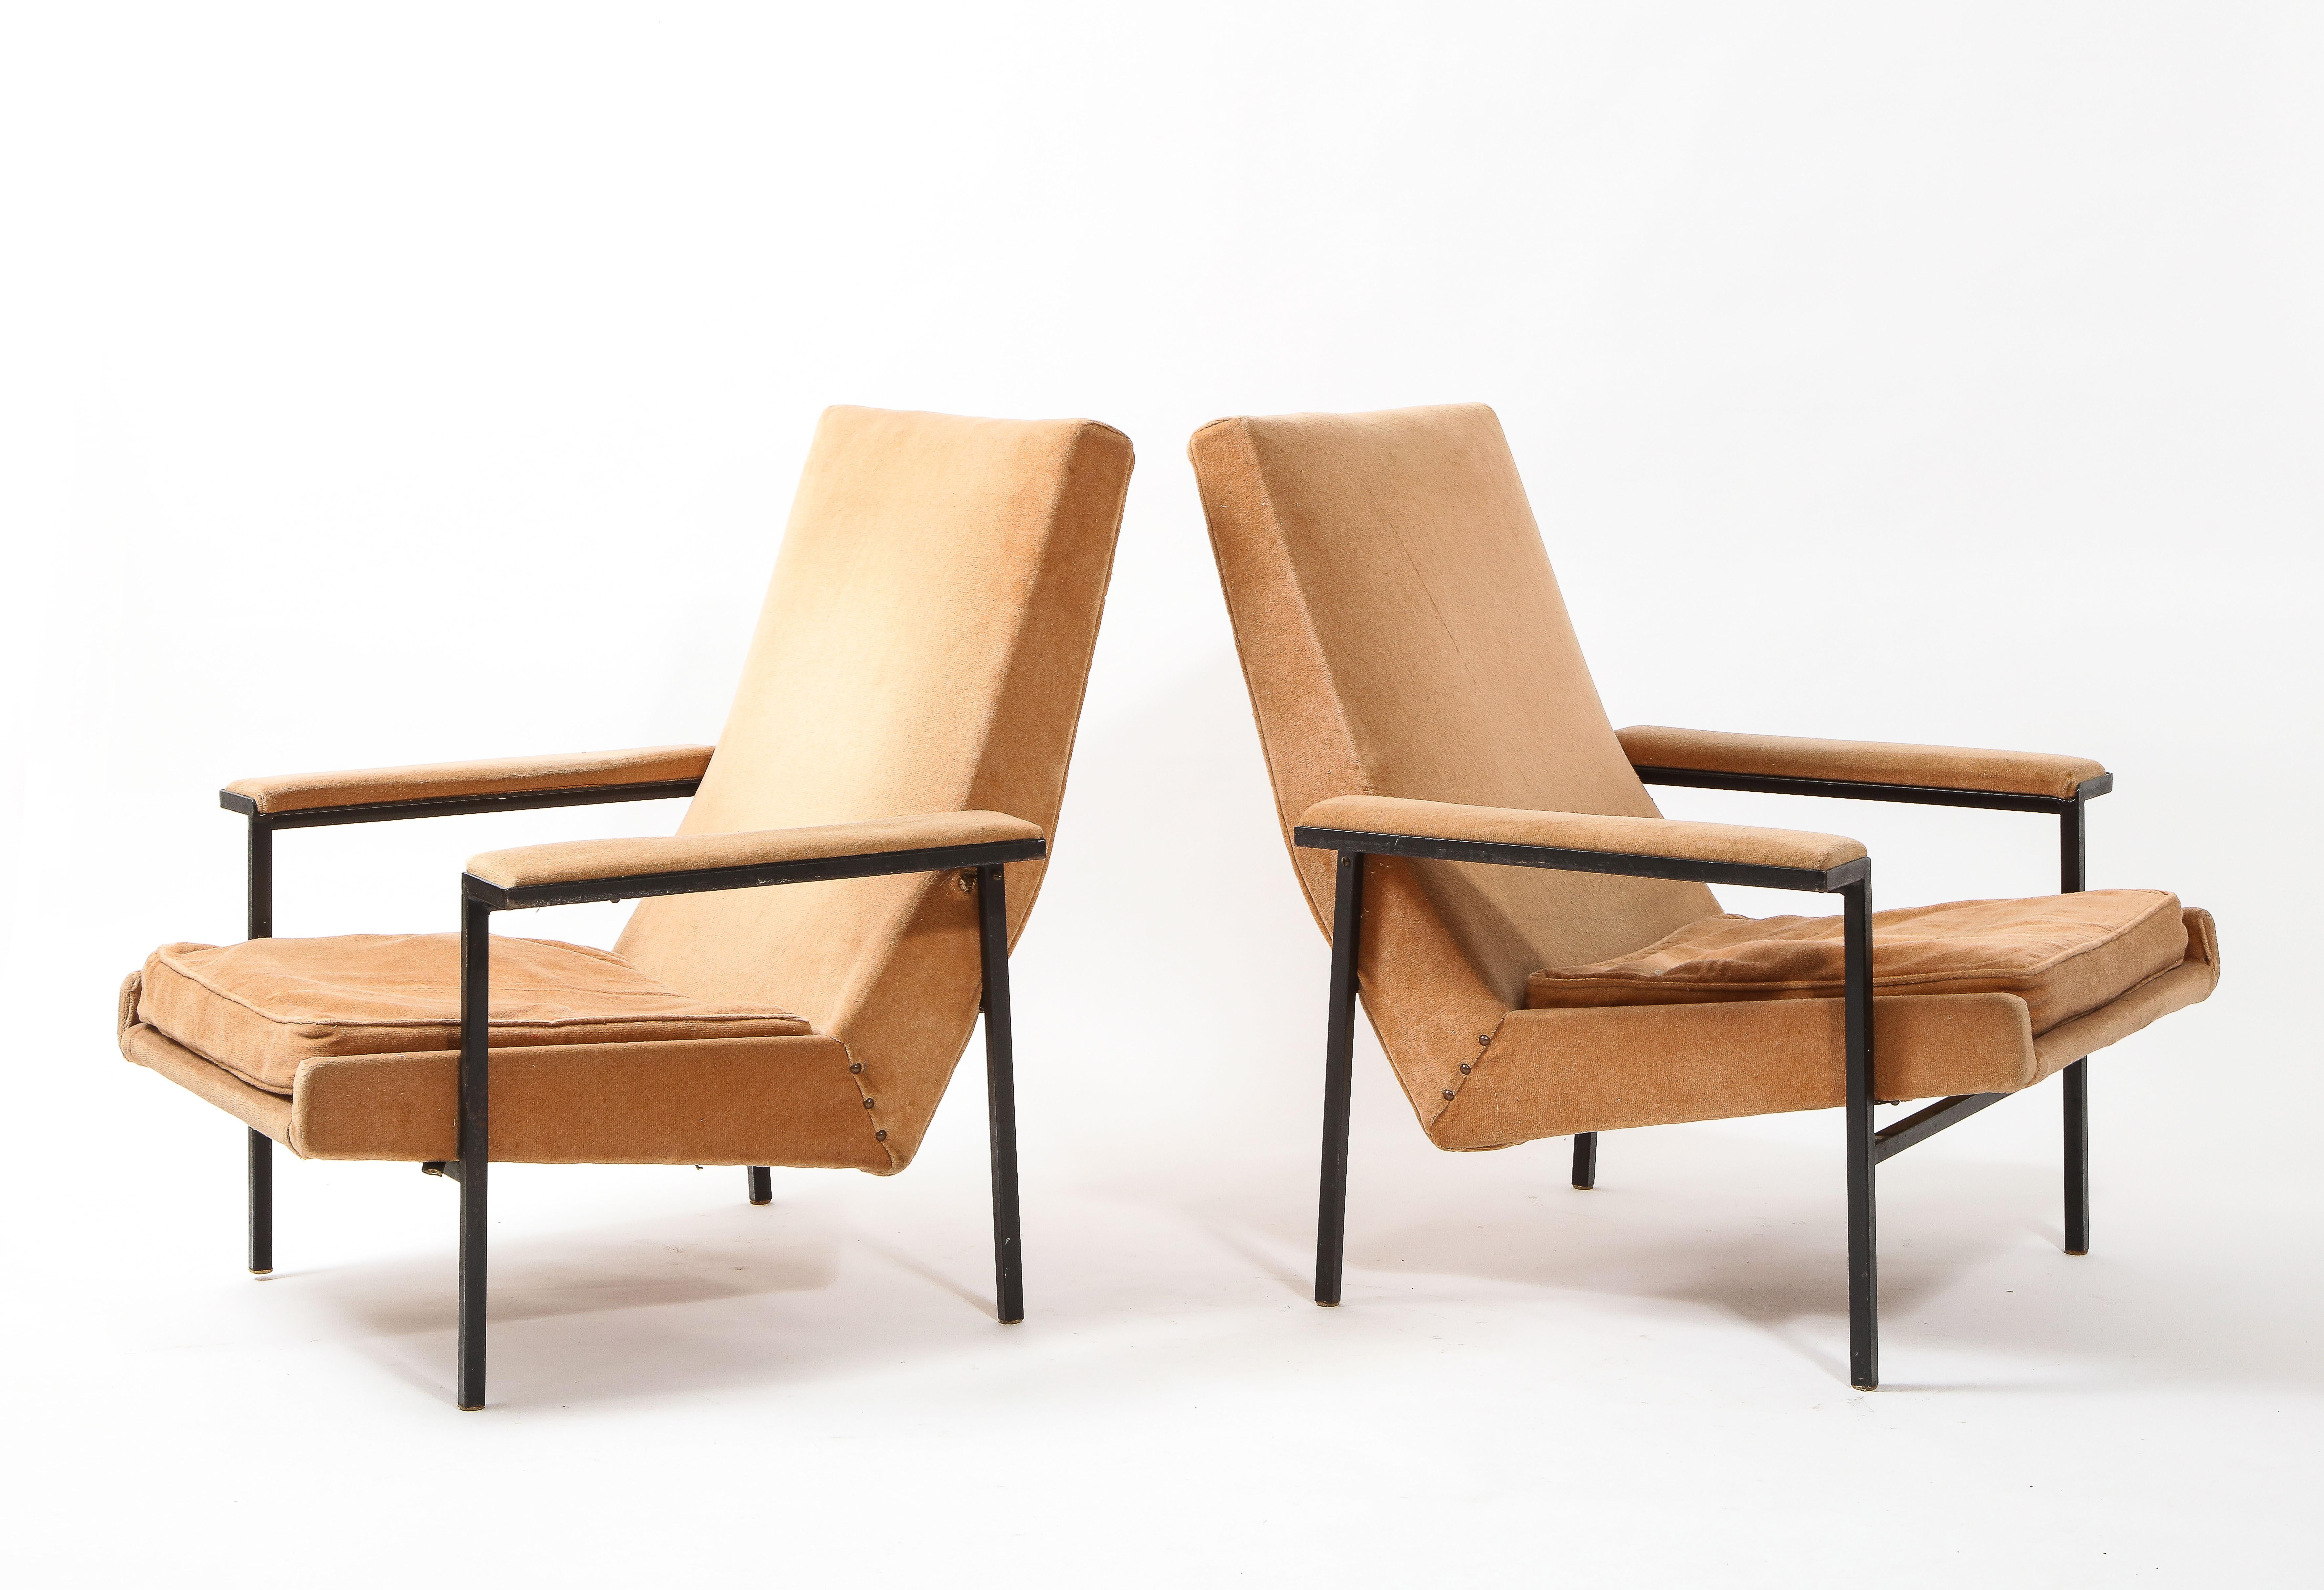 A.R.P Guariche, Motte, Mortier Pair of Armchairs, France 1955 In Good Condition For Sale In New York, NY